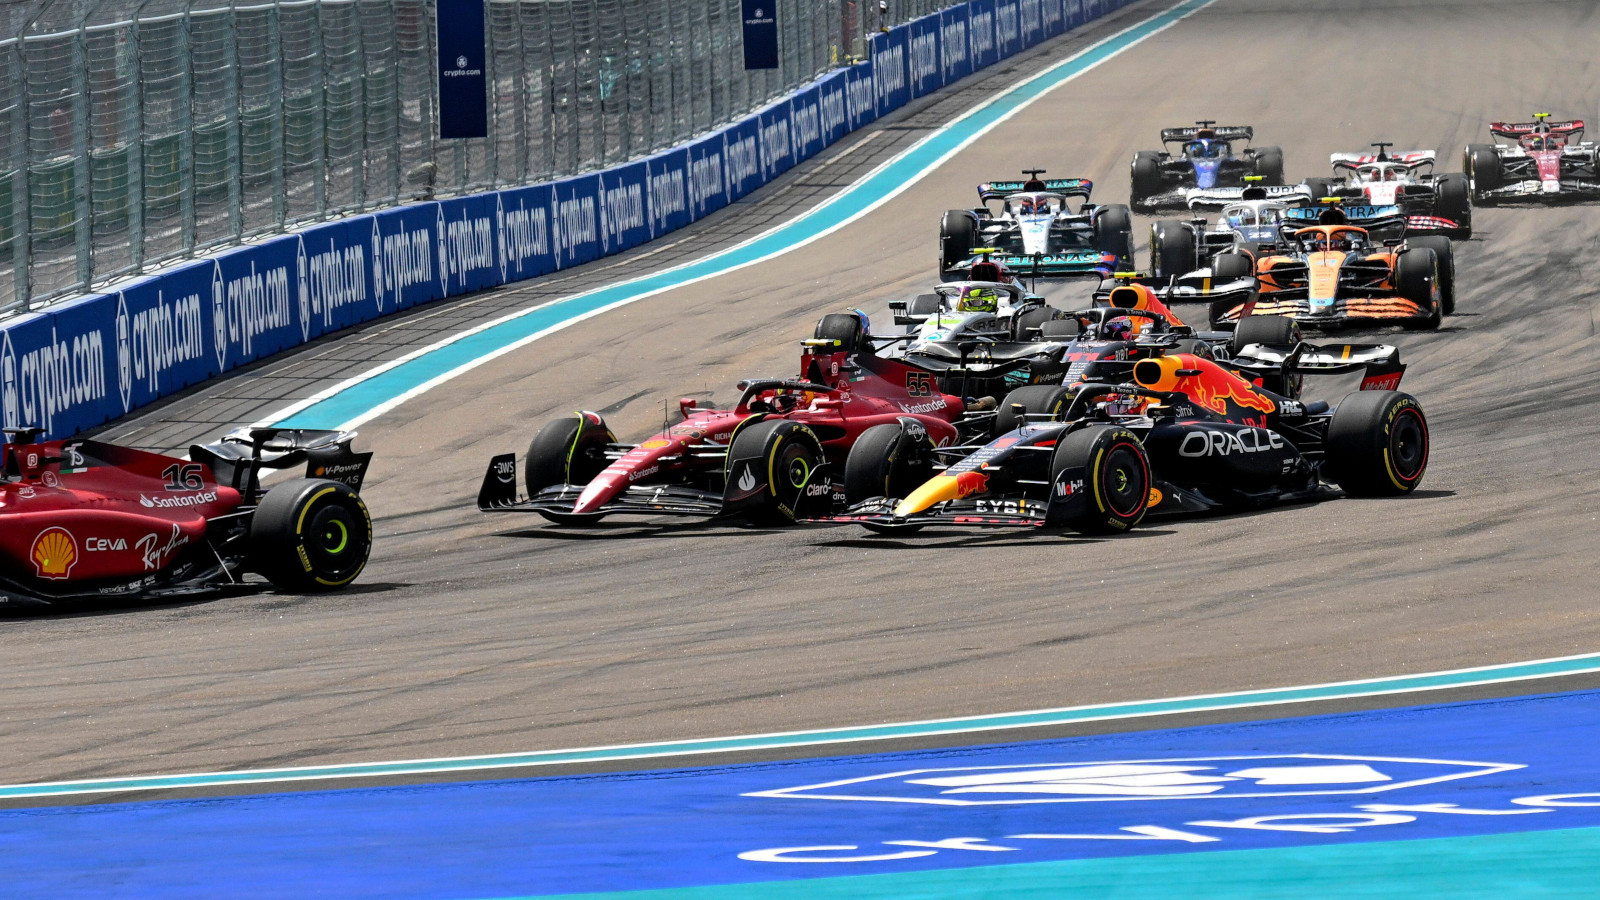 Carlos Sainz trying to defend against Max Verstappen at the start. Miami May 2022